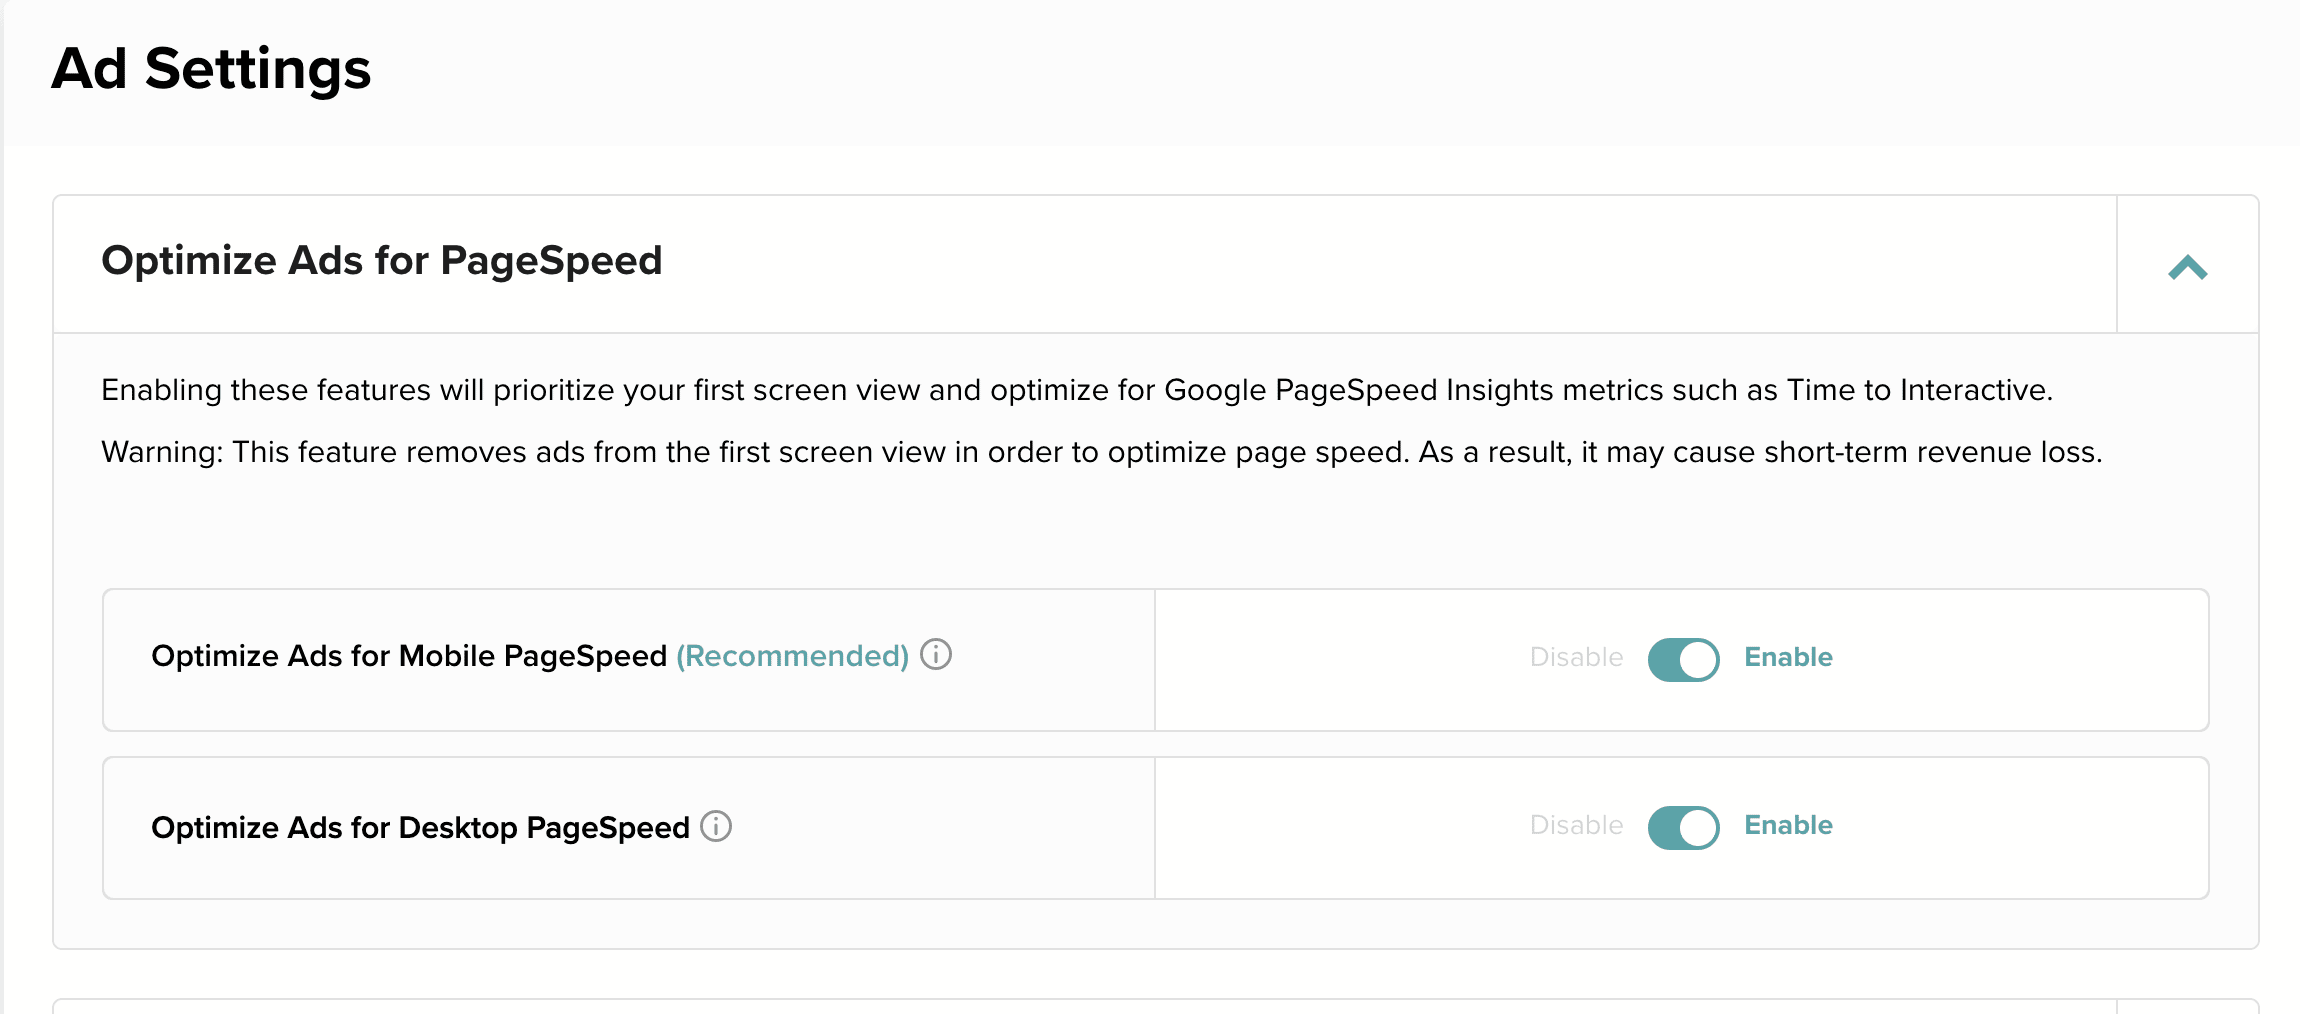 Screenshot of the Optimize Ads for PageSpeed settings in the Mediavine Dashboard